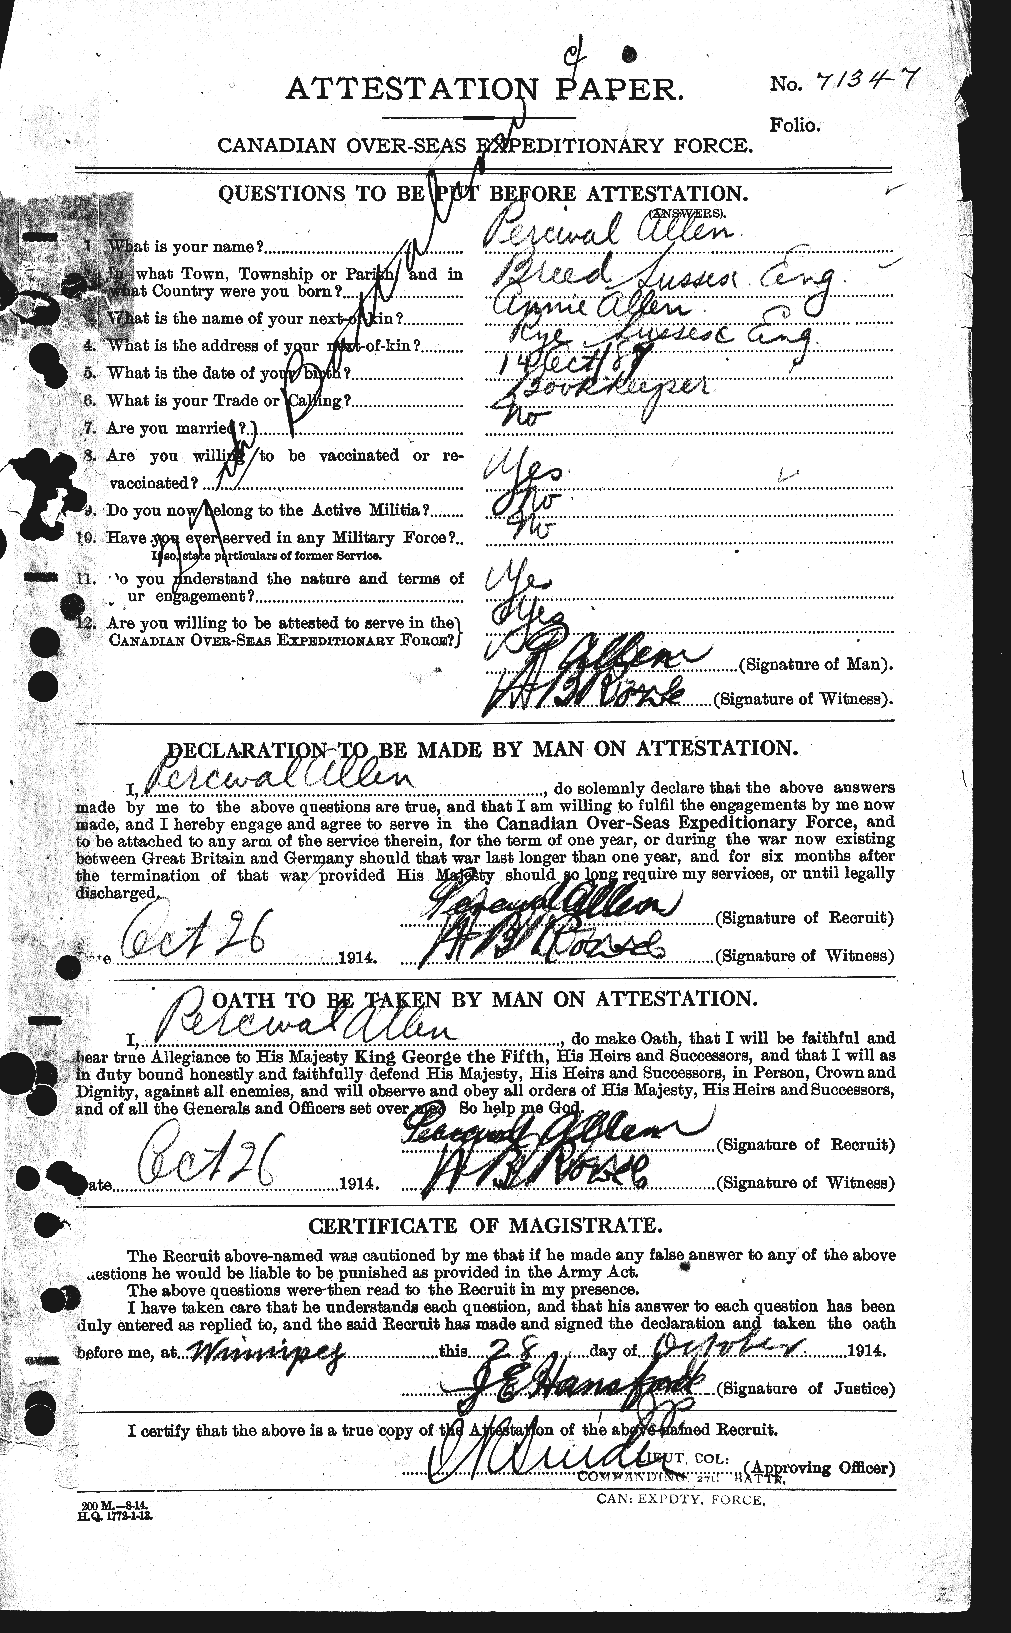 Personnel Records of the First World War - CEF 207110a